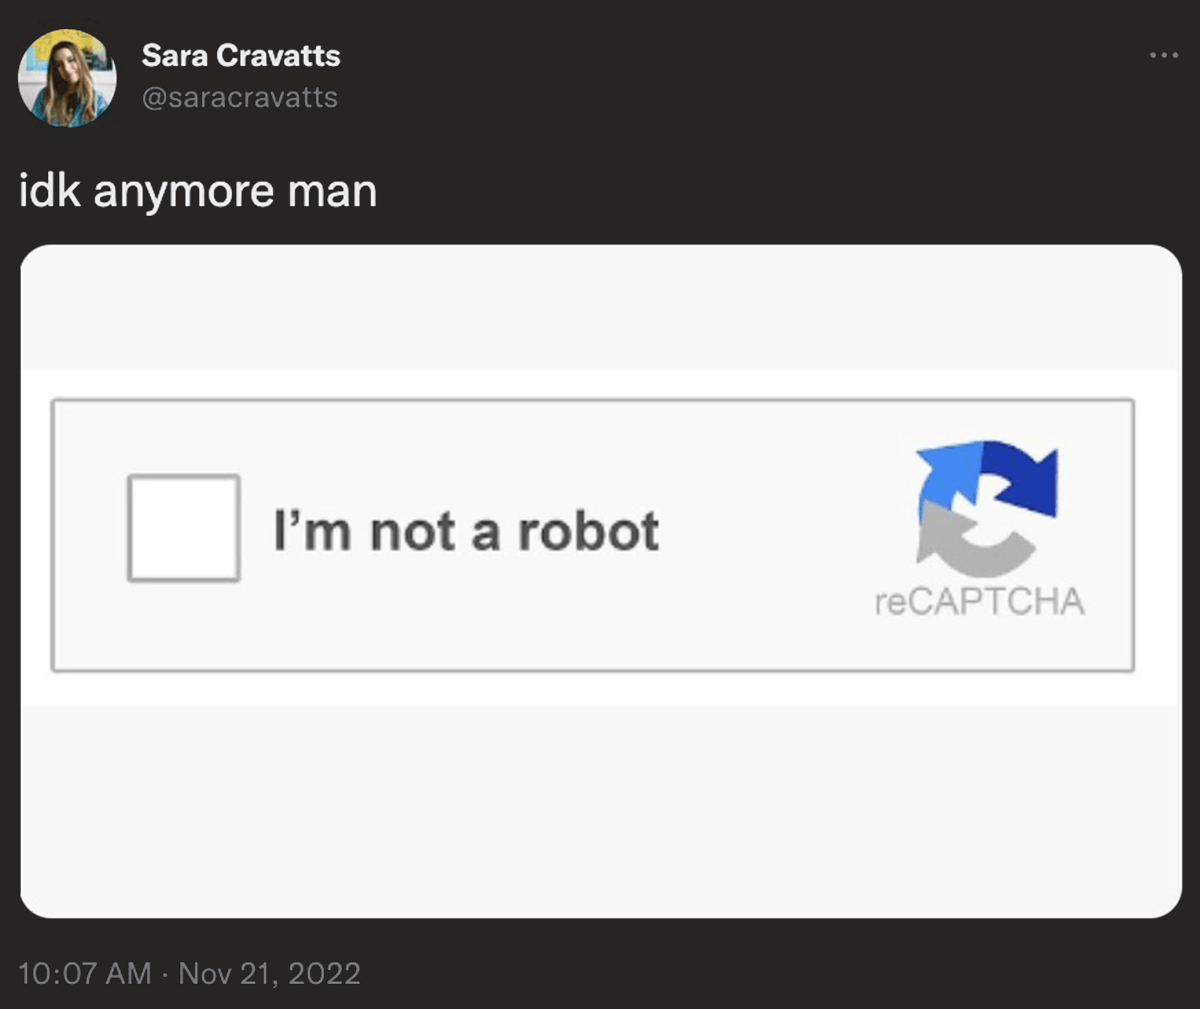 @saracravatts on Twitter: idk anymore man and an image of a captca that says 'I'm not a robot'